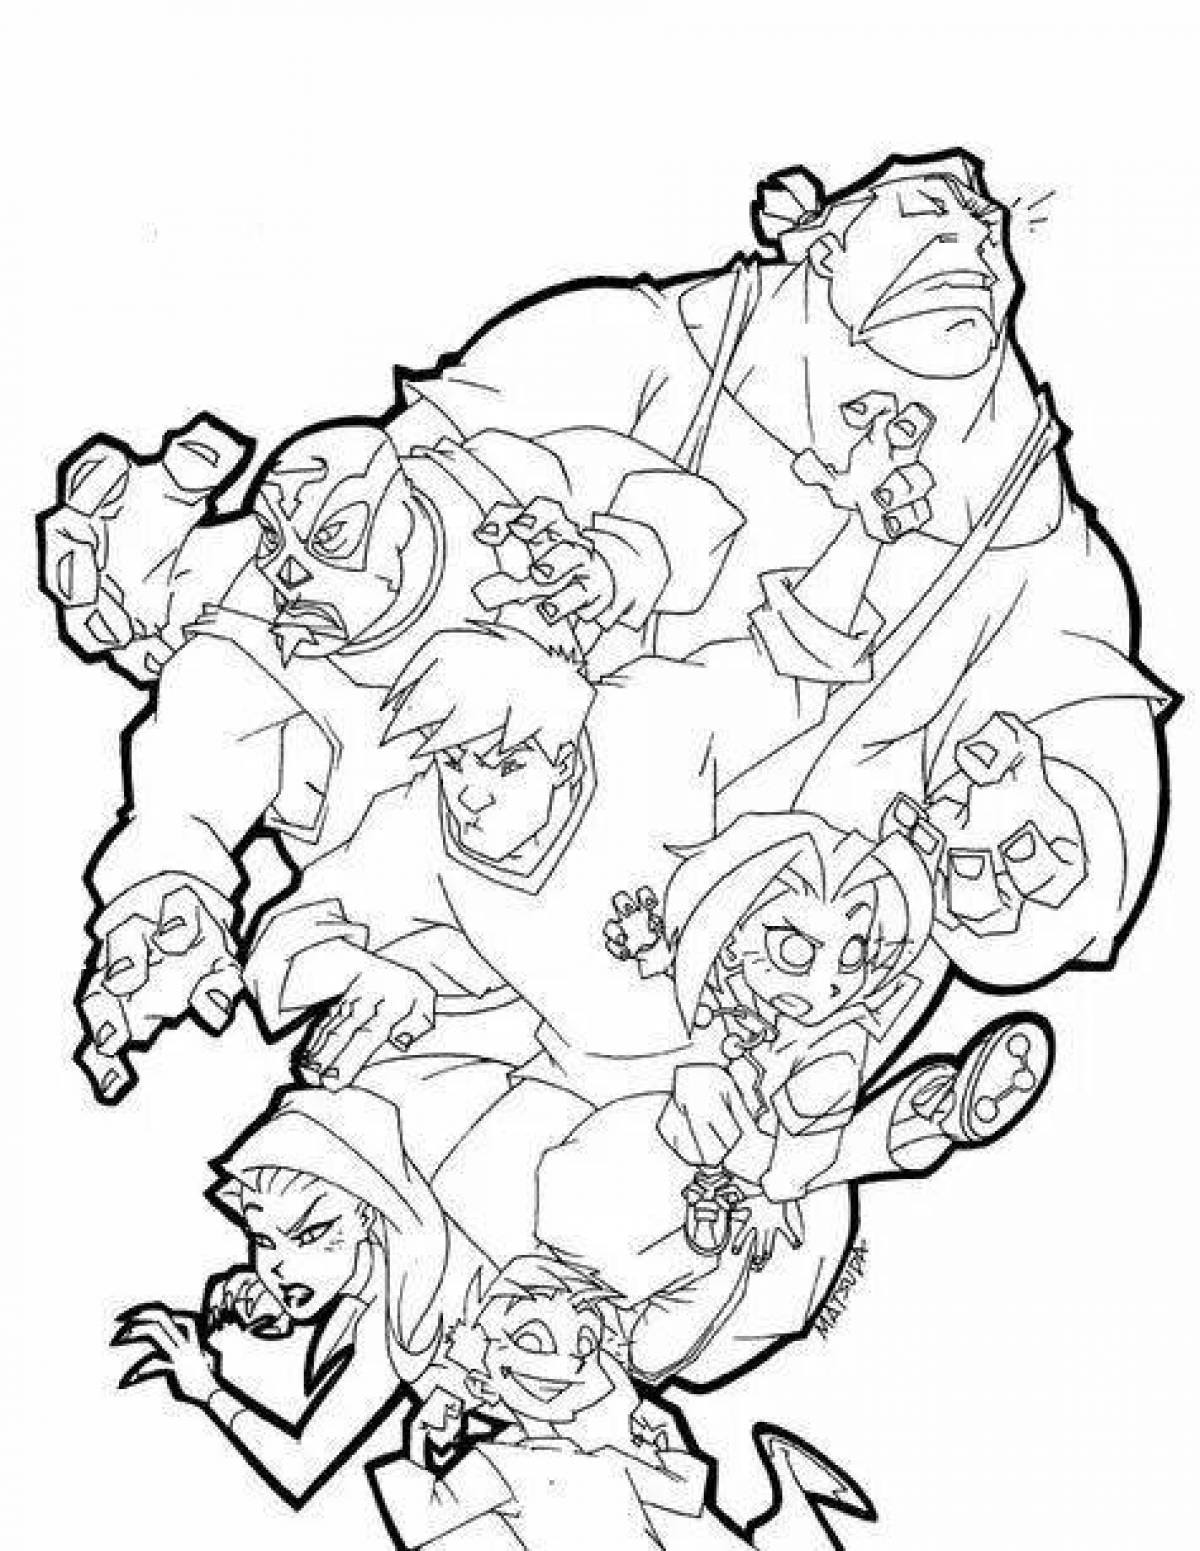 Jackie chan's bold coloring page